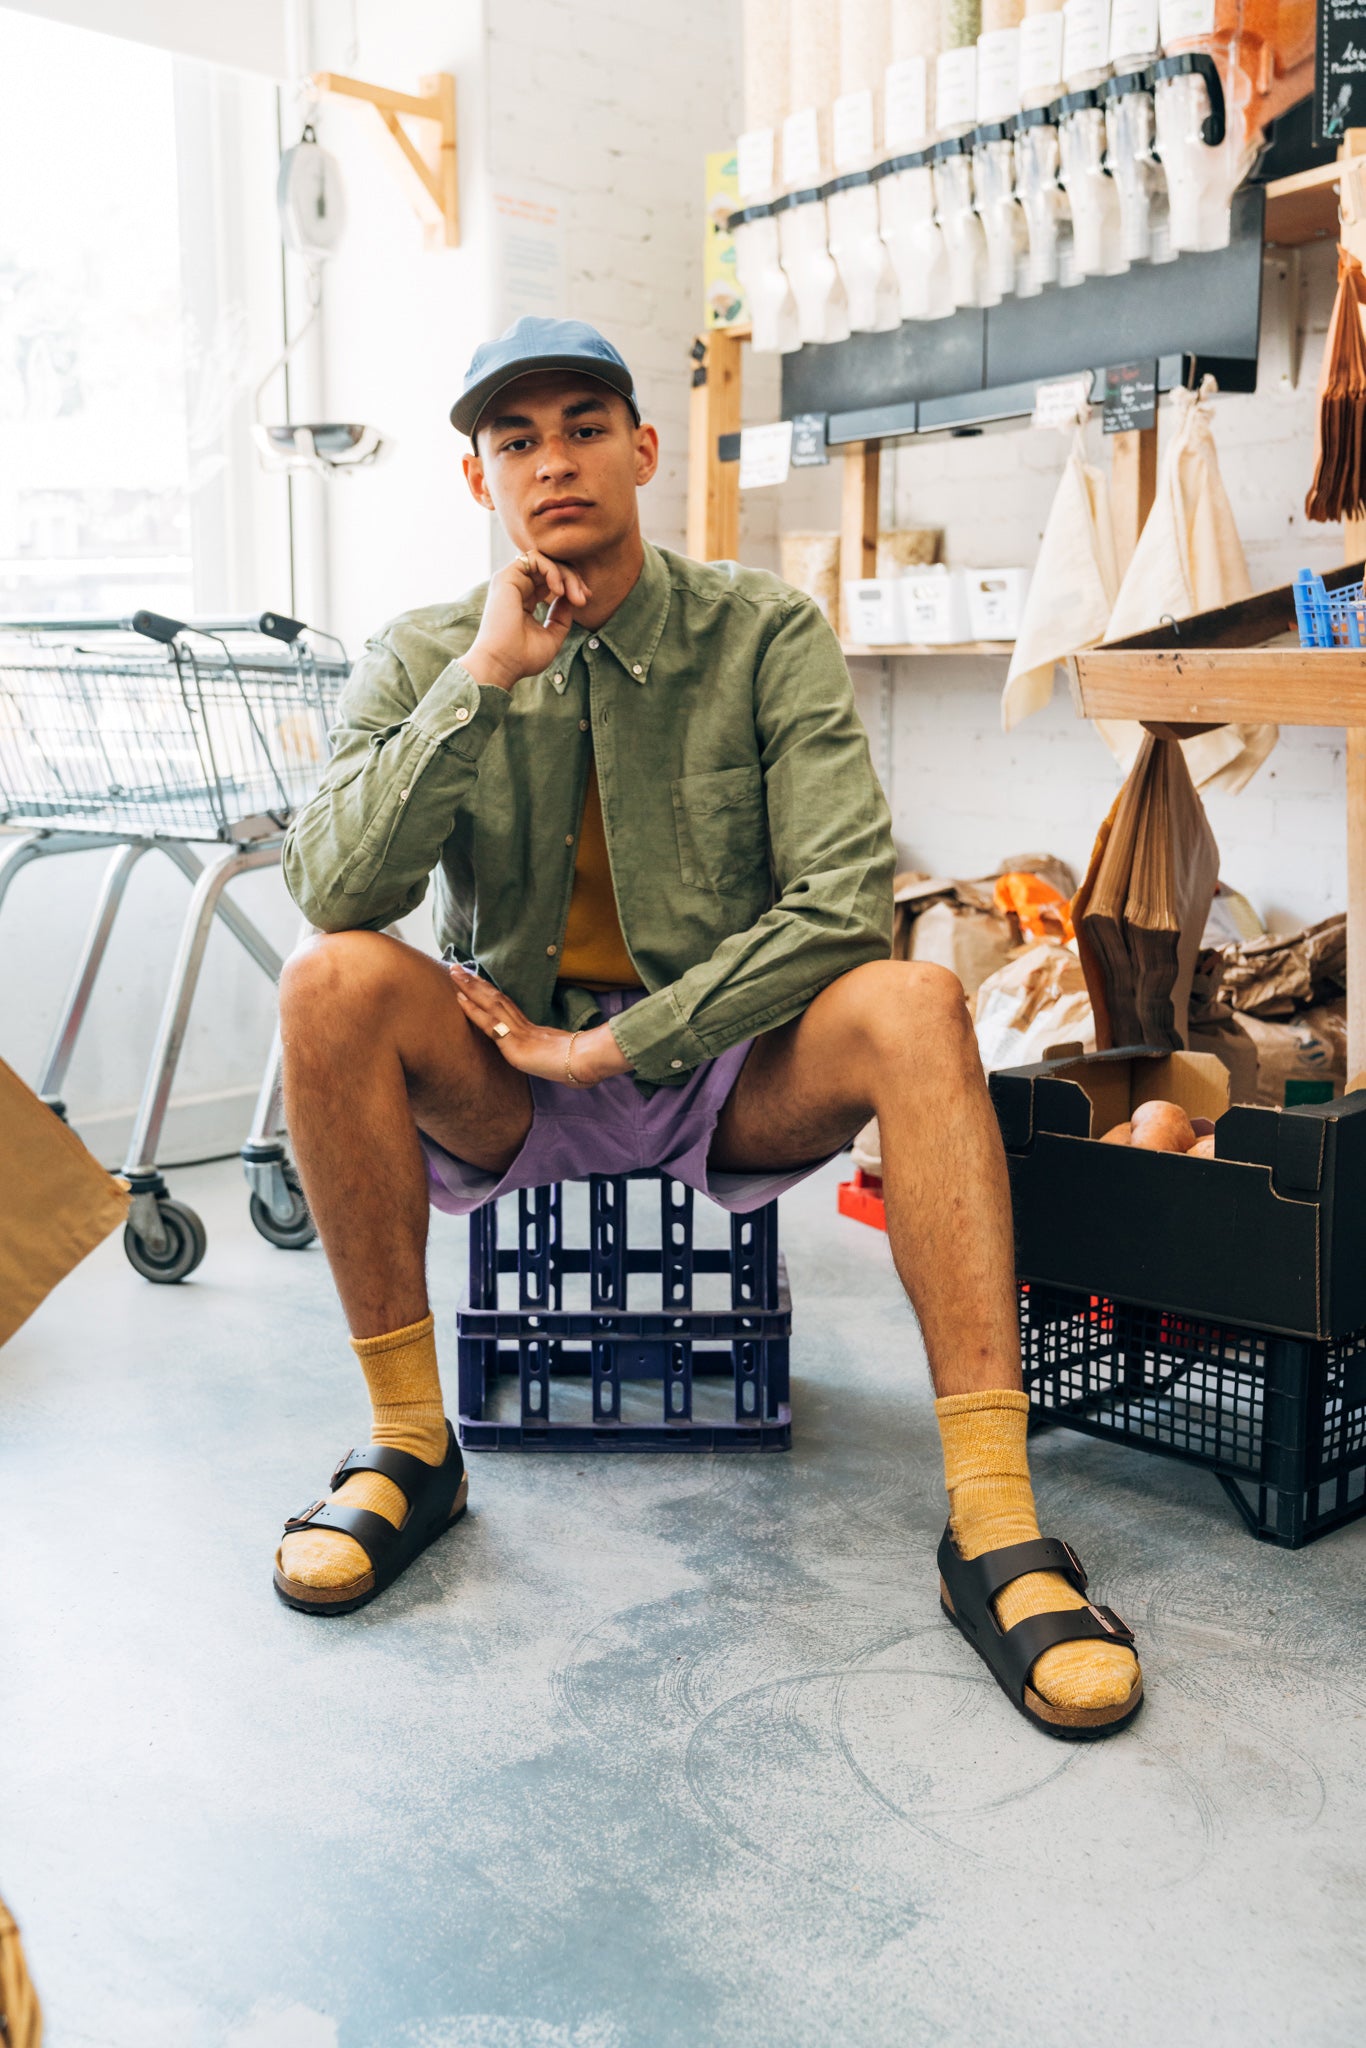 Deck~Out~And~About: Socks, Sandals and Supermarkets | Oi Polloi